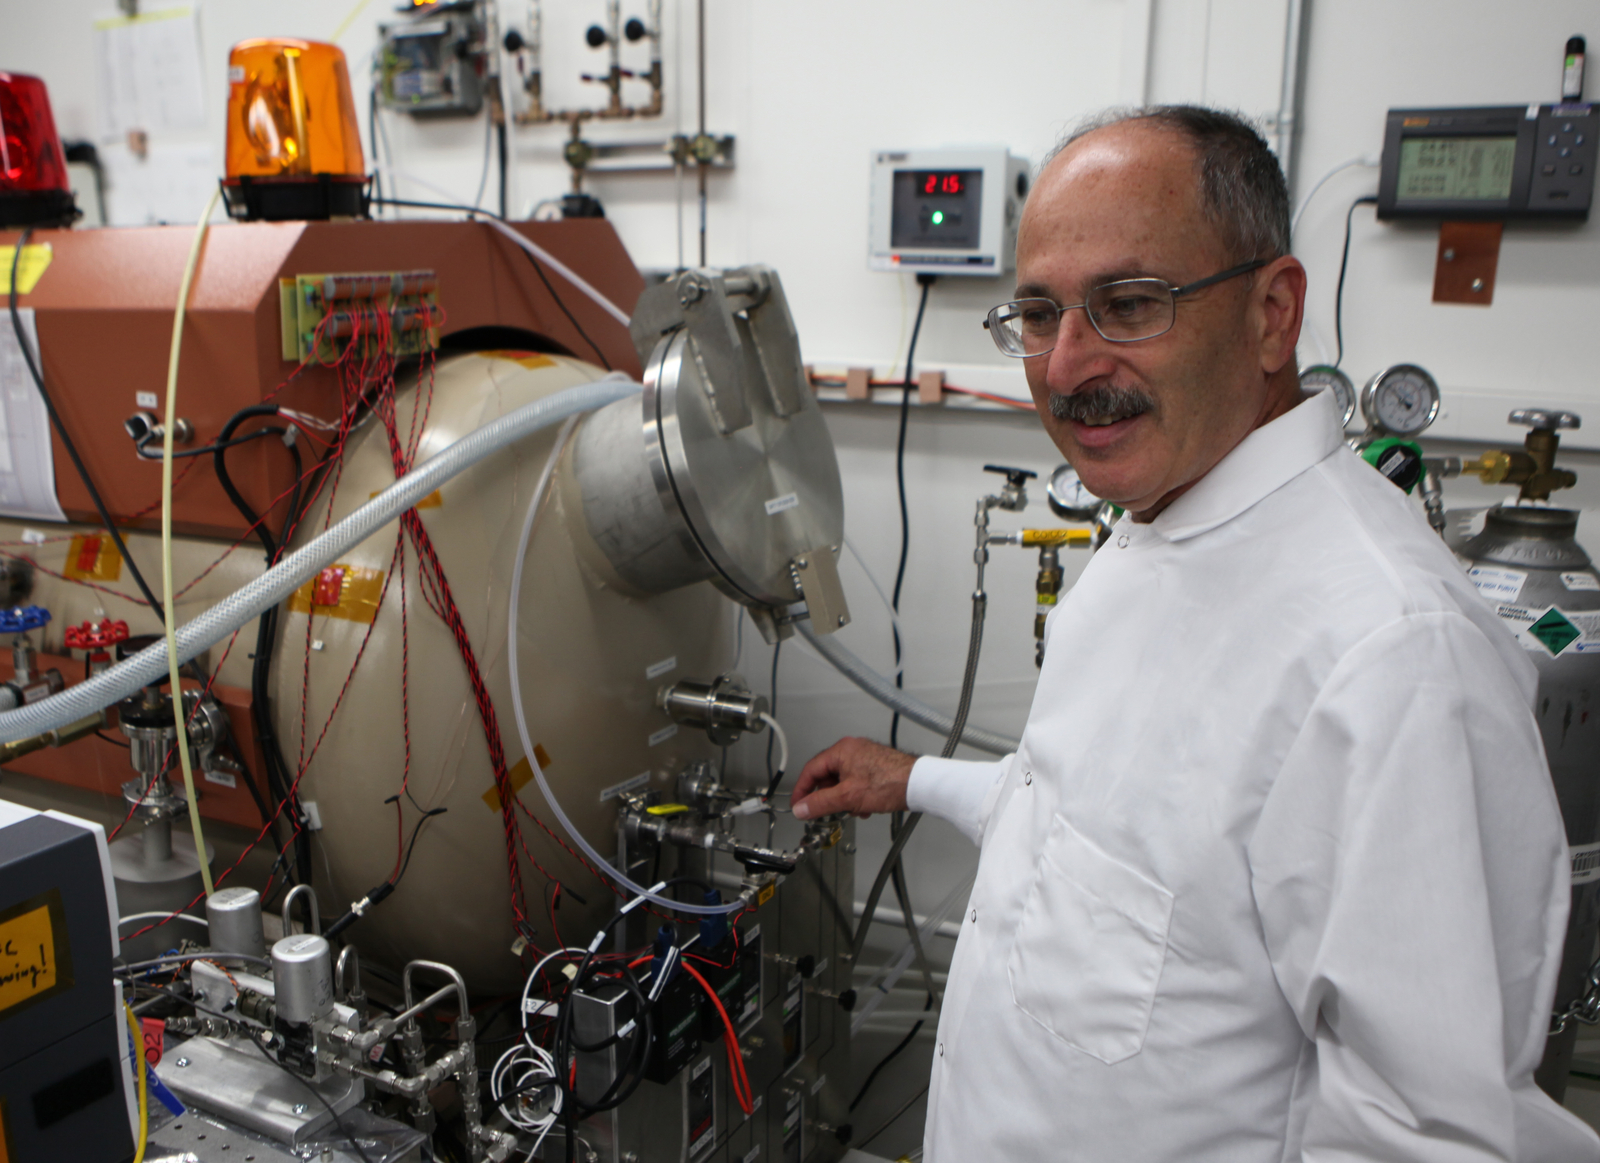 The MOXIE investigation on NASA's Mars 2020 rover will extract oxygen from the Martian atmosphere. In this image, MOXIE Principal Investigator Michael Hecht, of the Massachusetts Institute of Technology, Cambridge, is in the MOXIE laboratory at NASA's Jet Propulsion Laboratory, Pasadena, California.